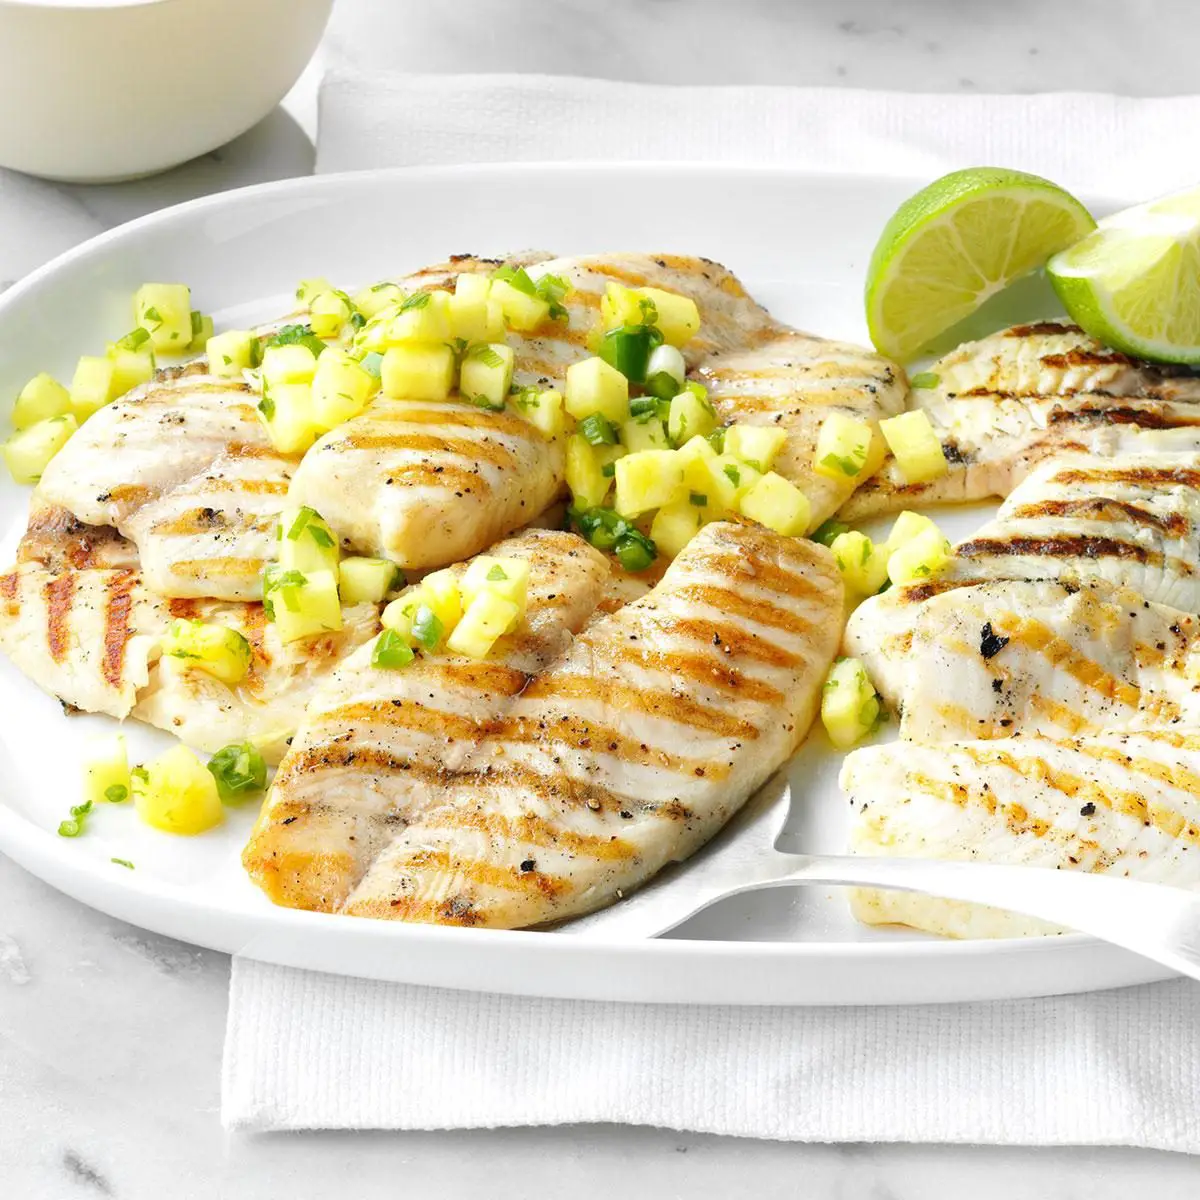 Grilled Tilapia with Pineapple Salsa Recipe: How to Make It